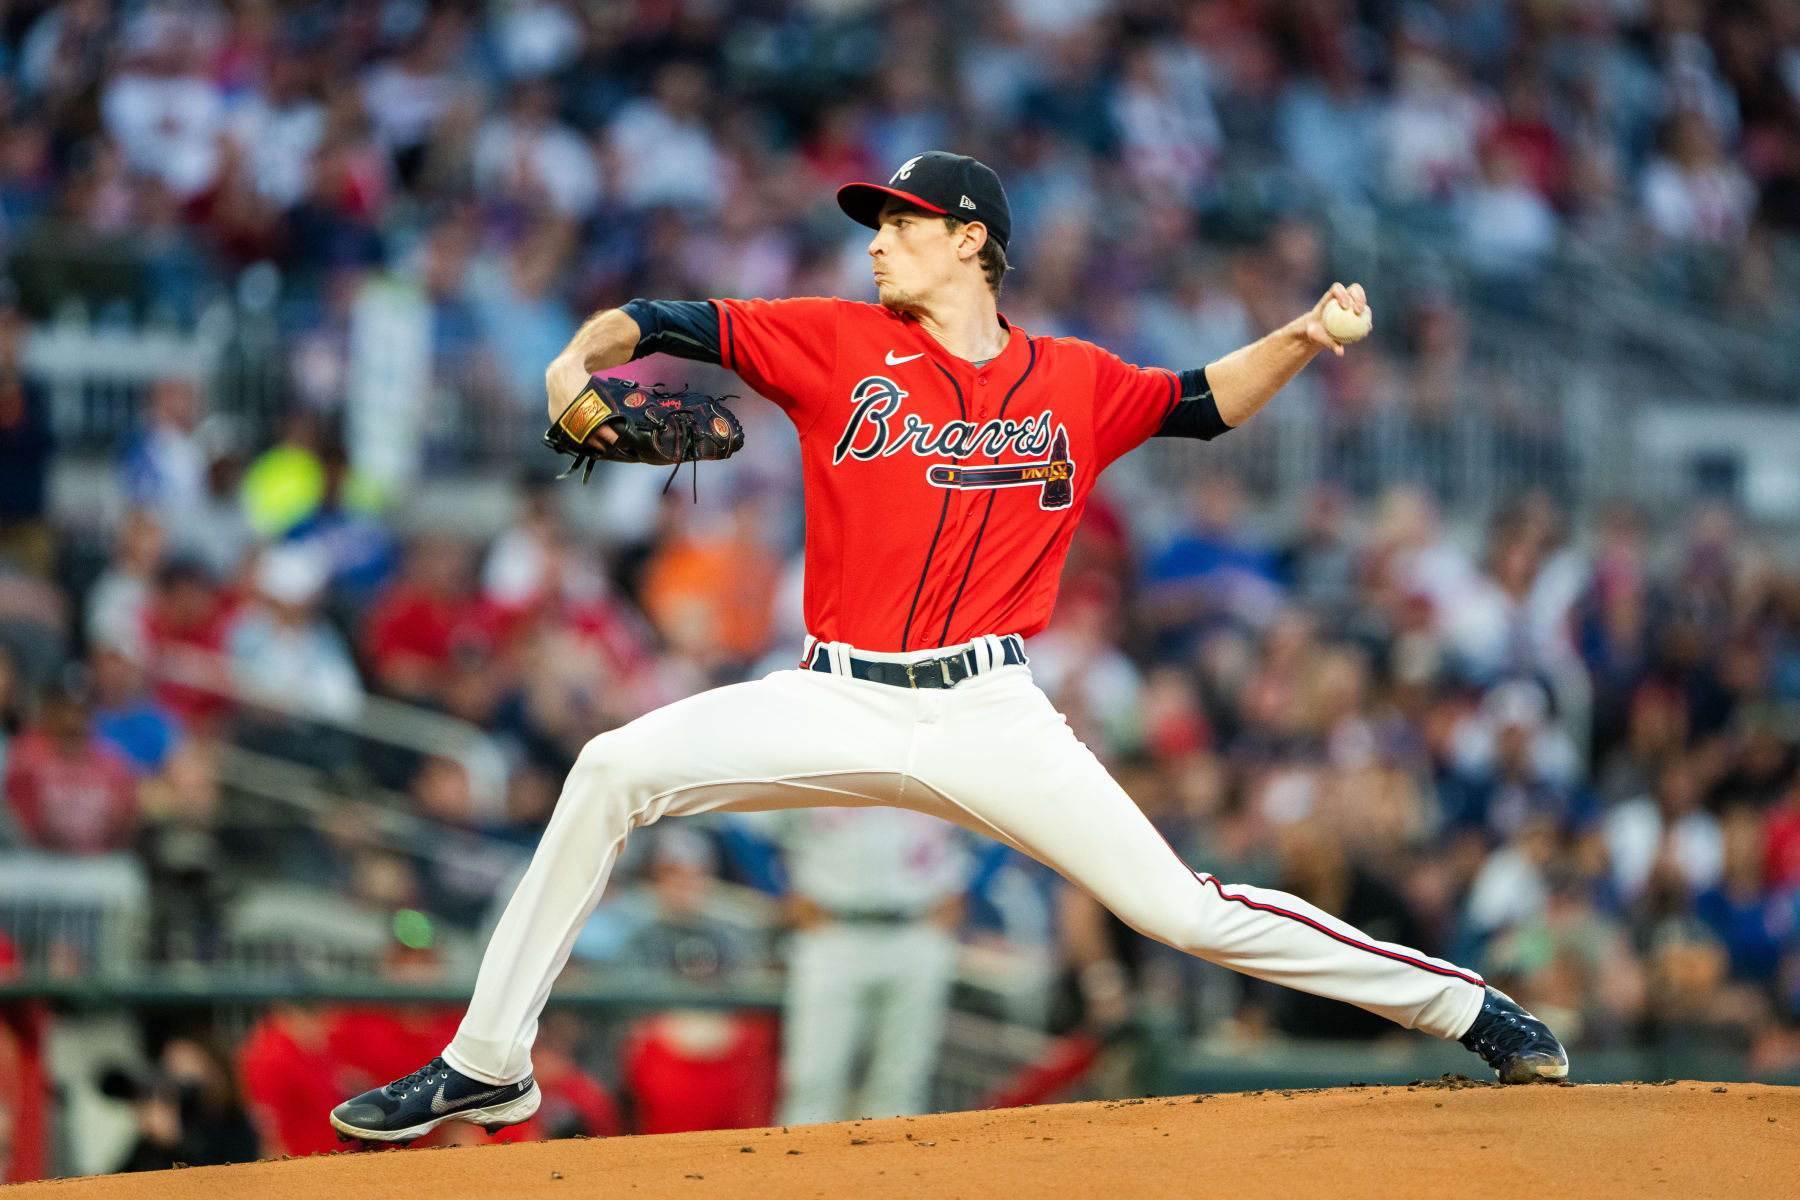 Michael Cunningham: Braves need reliable starting pitcher, fewer